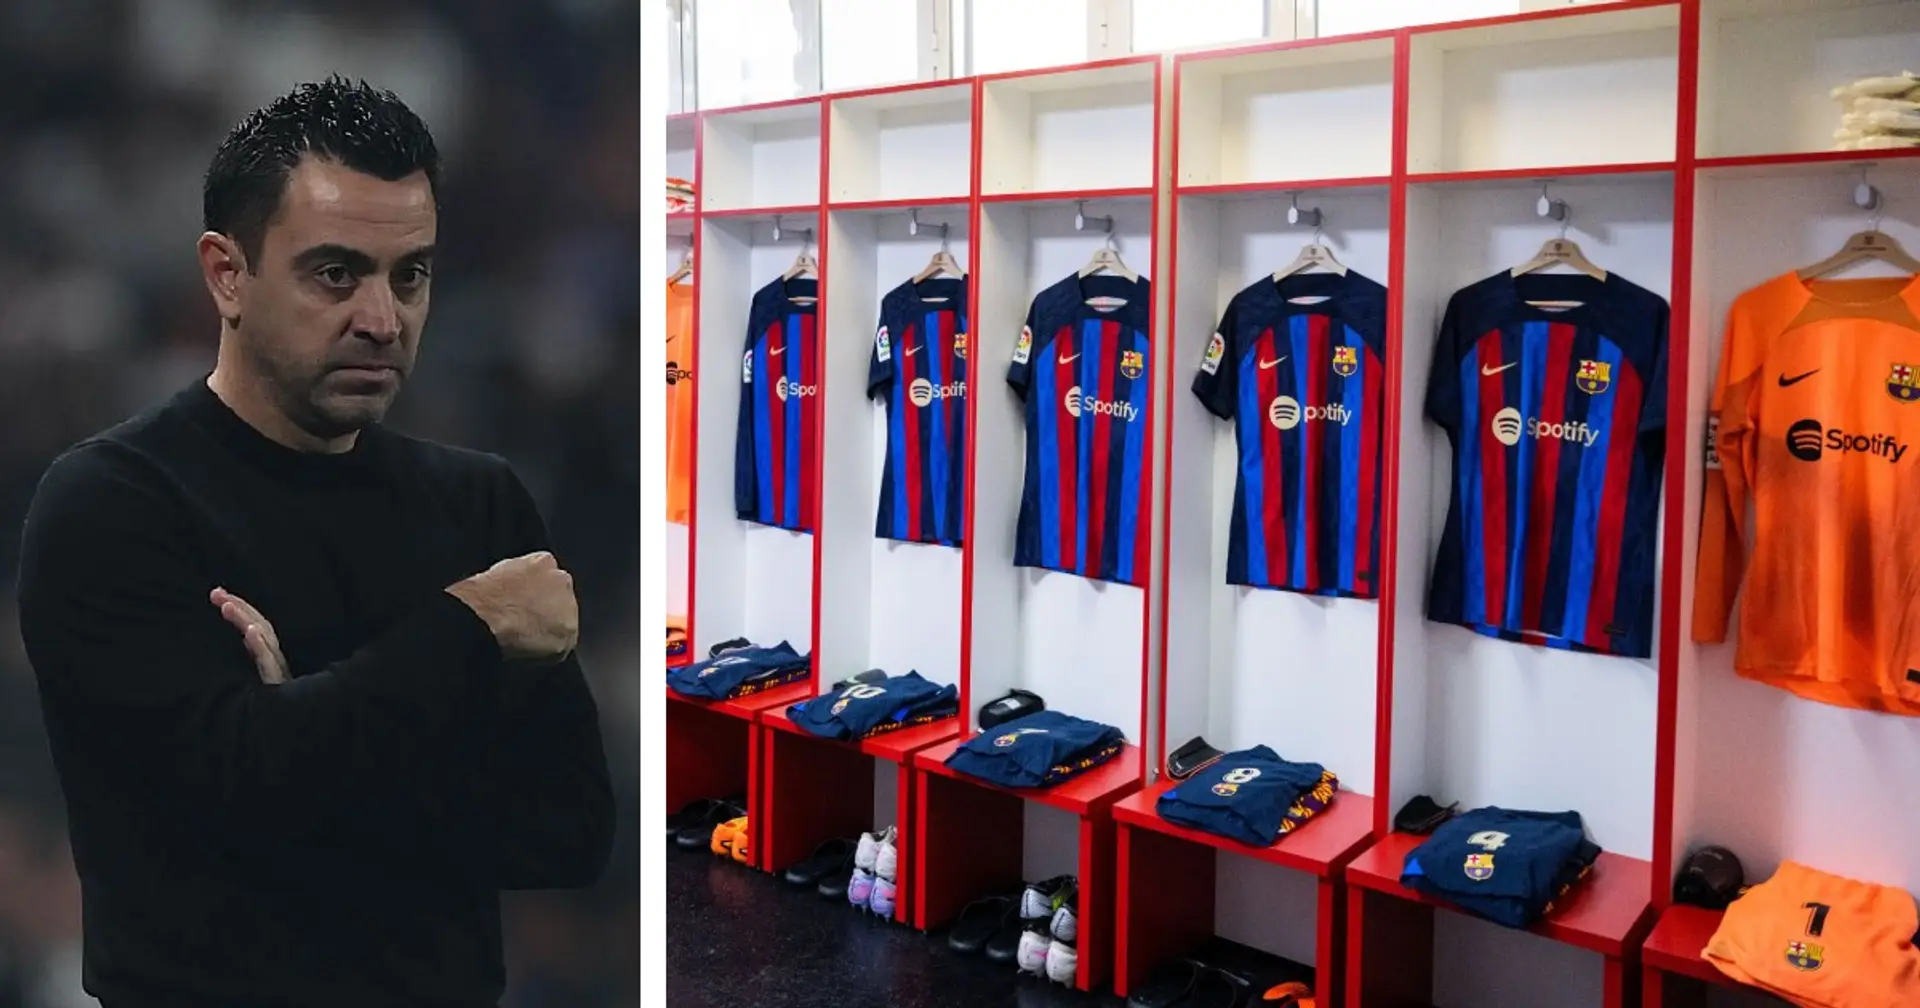 Current atmosphere in Barca dressing room revealed